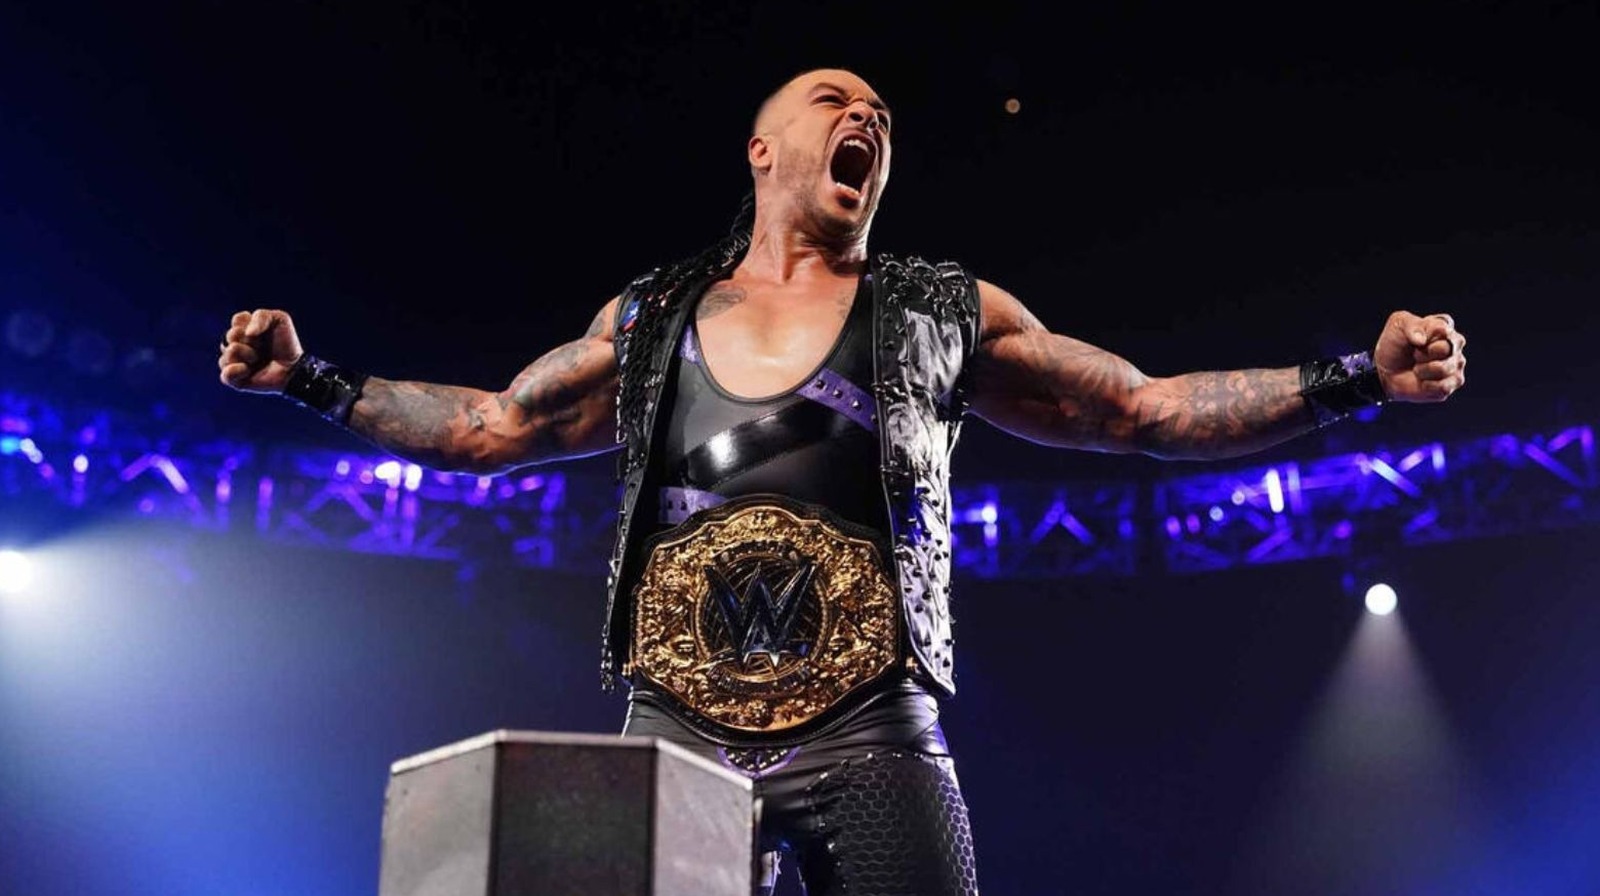 The Judgment Day Helps Damien Priest Retain World Heavyweight Title At WWE Backlash